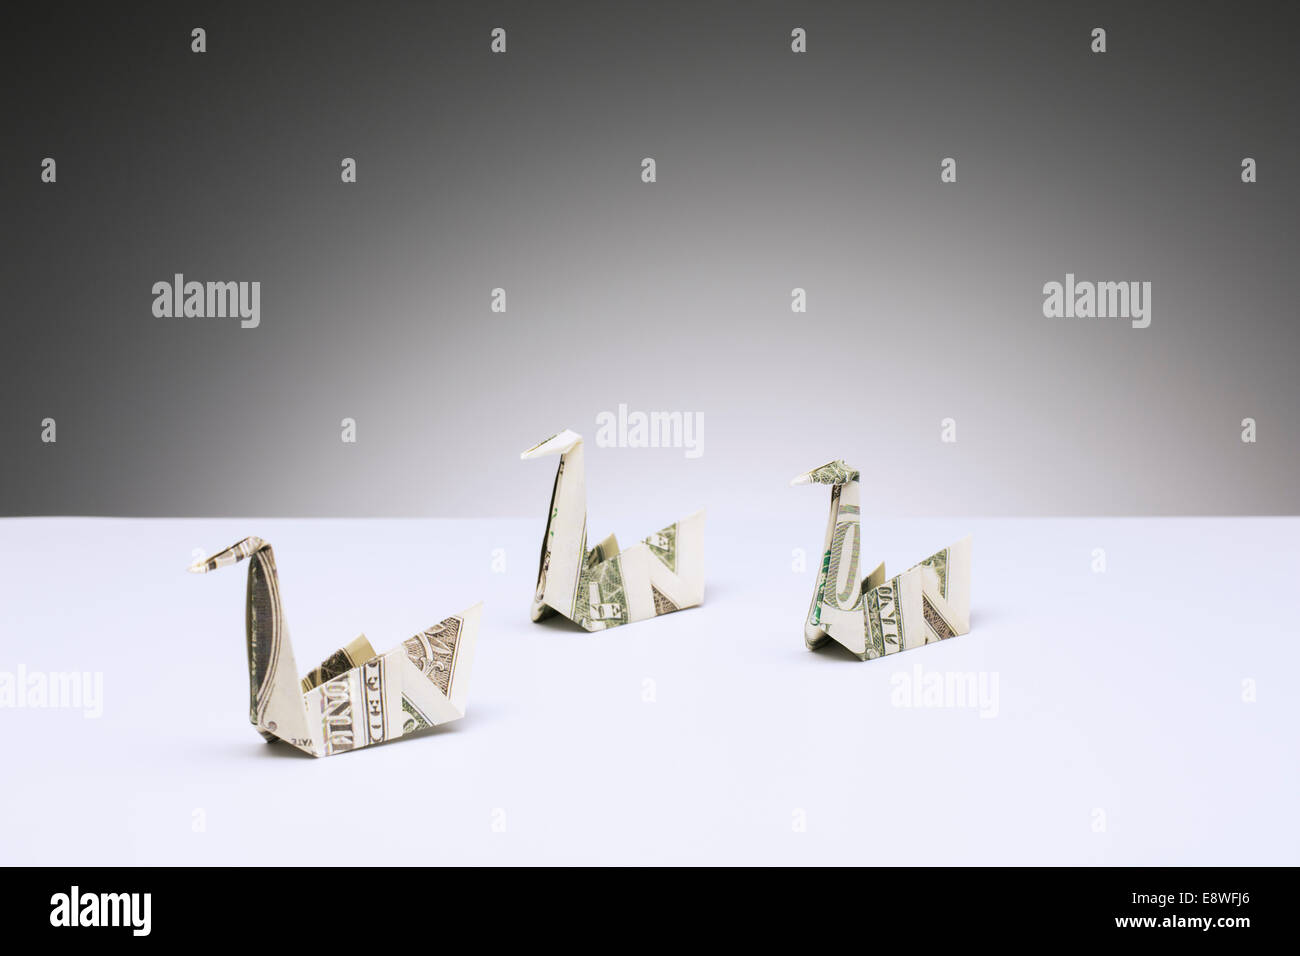 Origami swans made of dollar bills on counter Stock Photo